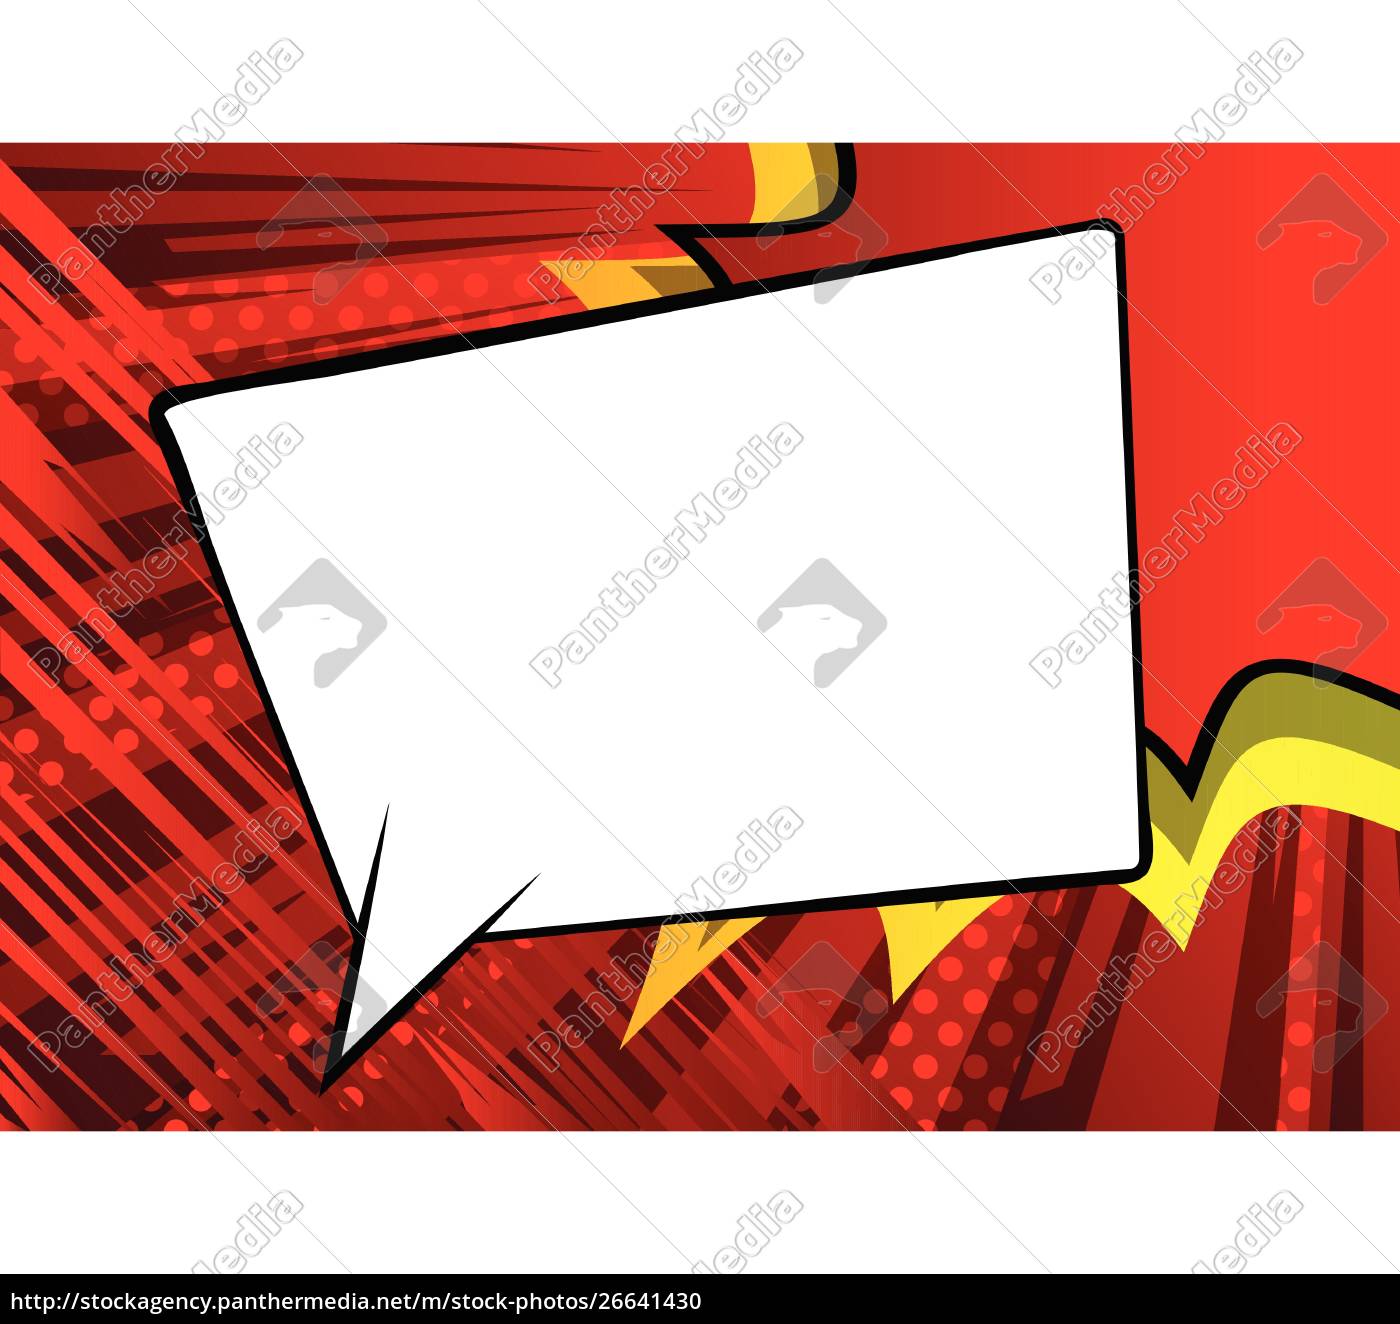 Comic Book Background With Big Blank Speech Bubble Stock Image Panthermedia Stock Agency